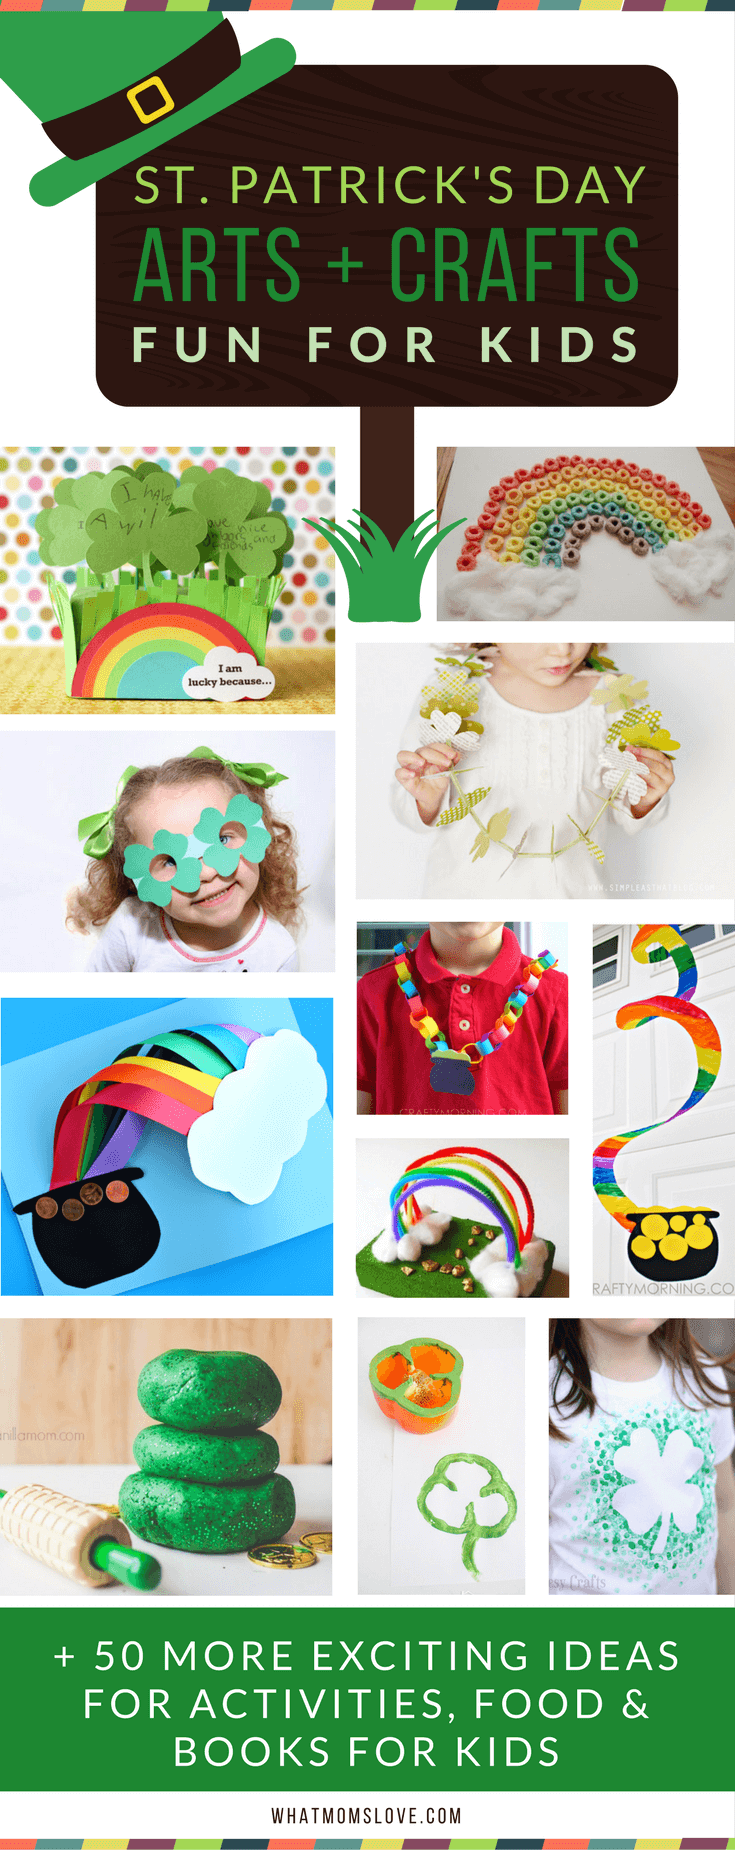 St Patricks Day Arts and Crafts Ideas for Kids | Fun DIY projects with Leprechauns, Shamrocks, and Rainbows! Plus free printables!